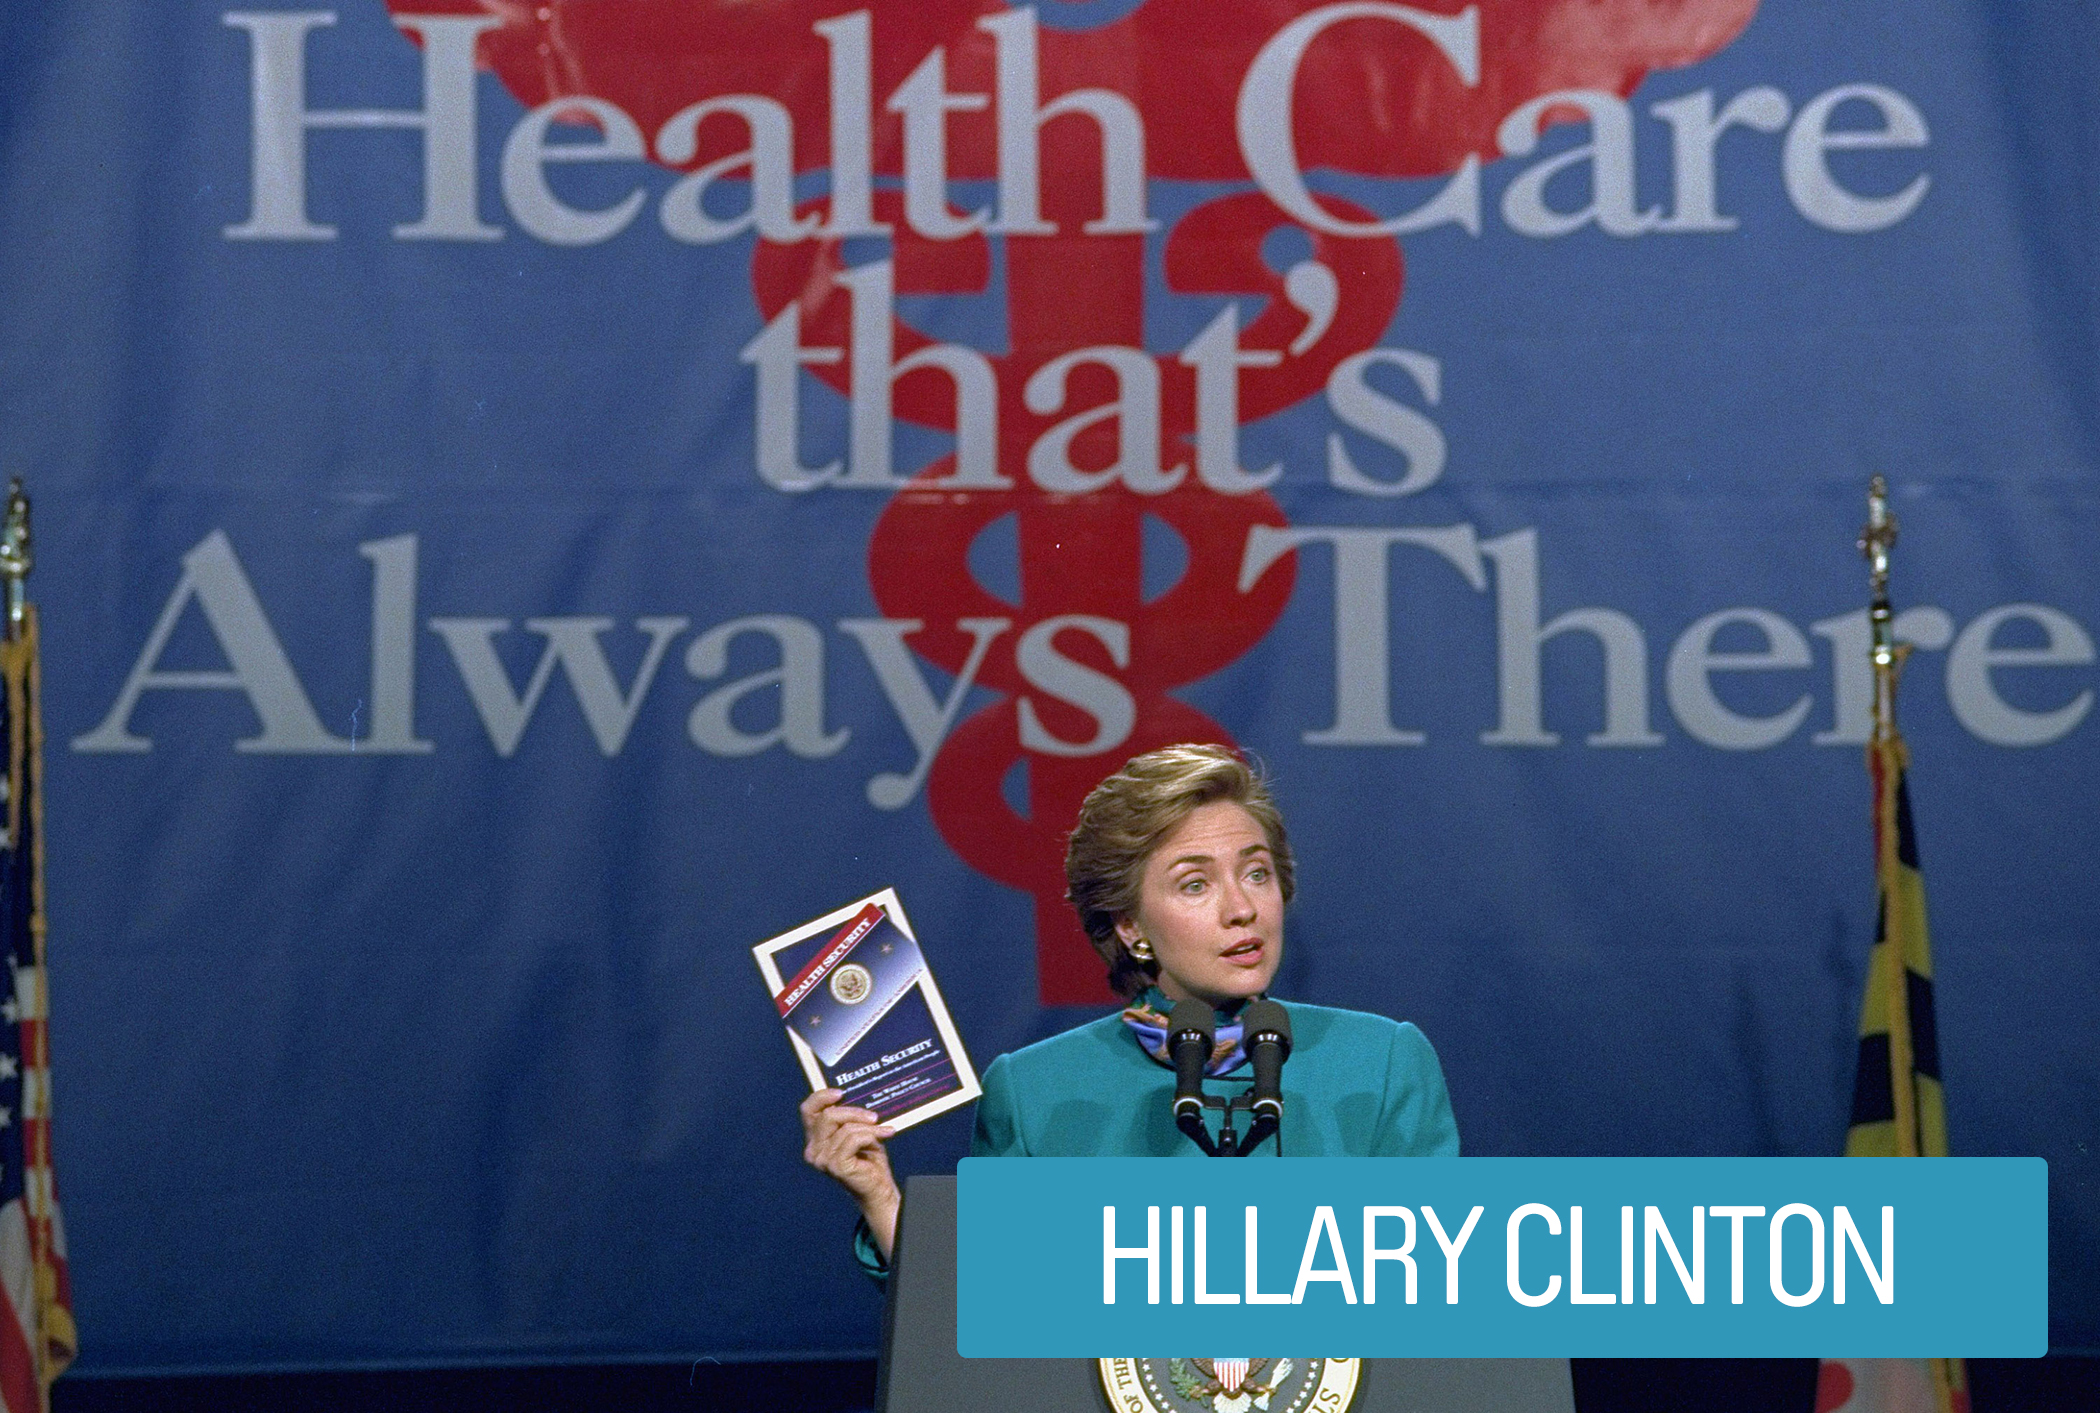 As head of the Task Force on Health Care Reform, Hillary Clinton brought together members of the health care industry with lawmakers, government officials and consumer rights advocates to strategize a solution to the growing numbers of uninsured. The plan did not pass congress, but it paved the way for Obamacare.